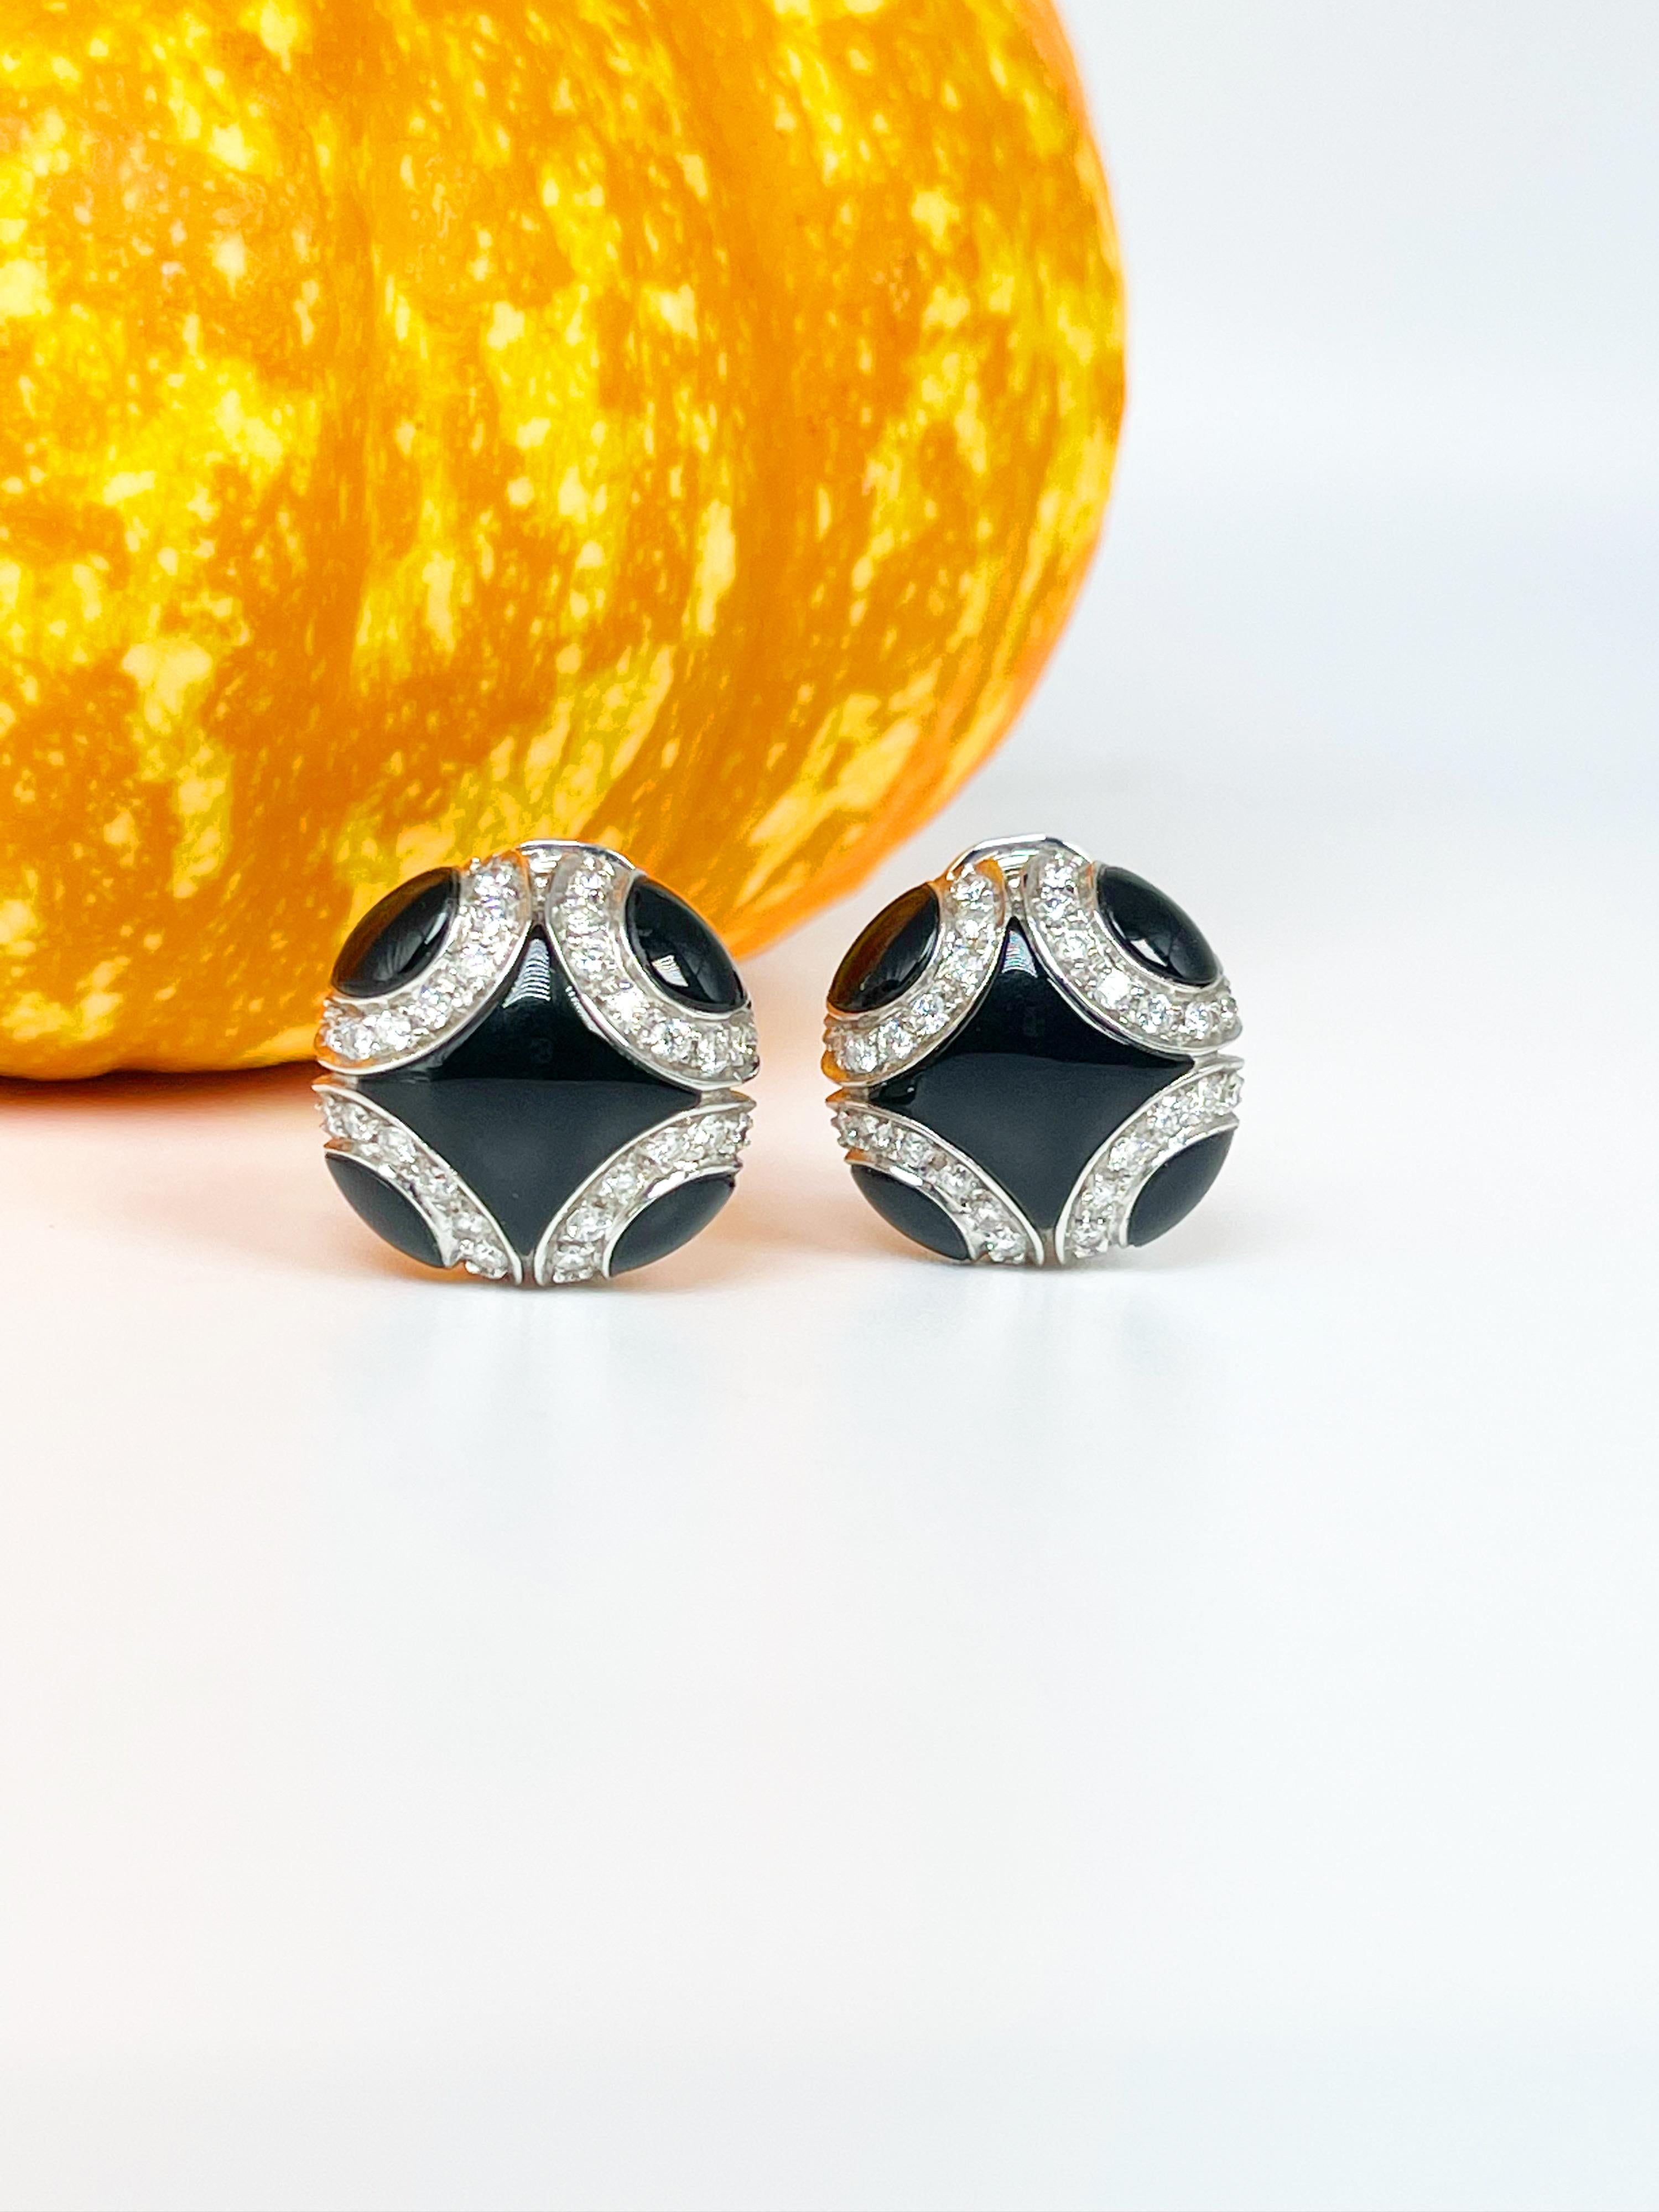 
Exquisite Onyx & Diamond Earrings in 18KT white gold by the designer Chantecler.

GRAM WEIGHT: 14.30gr
GOLD: 18KT white gold
CLOSIRE: OMEGA
NATURAL DIAMOND(S)
Cut: Round Brilliant
Color: F (average)
Clarity: VS (averge)
Carat: 1.12ct
Diameter: